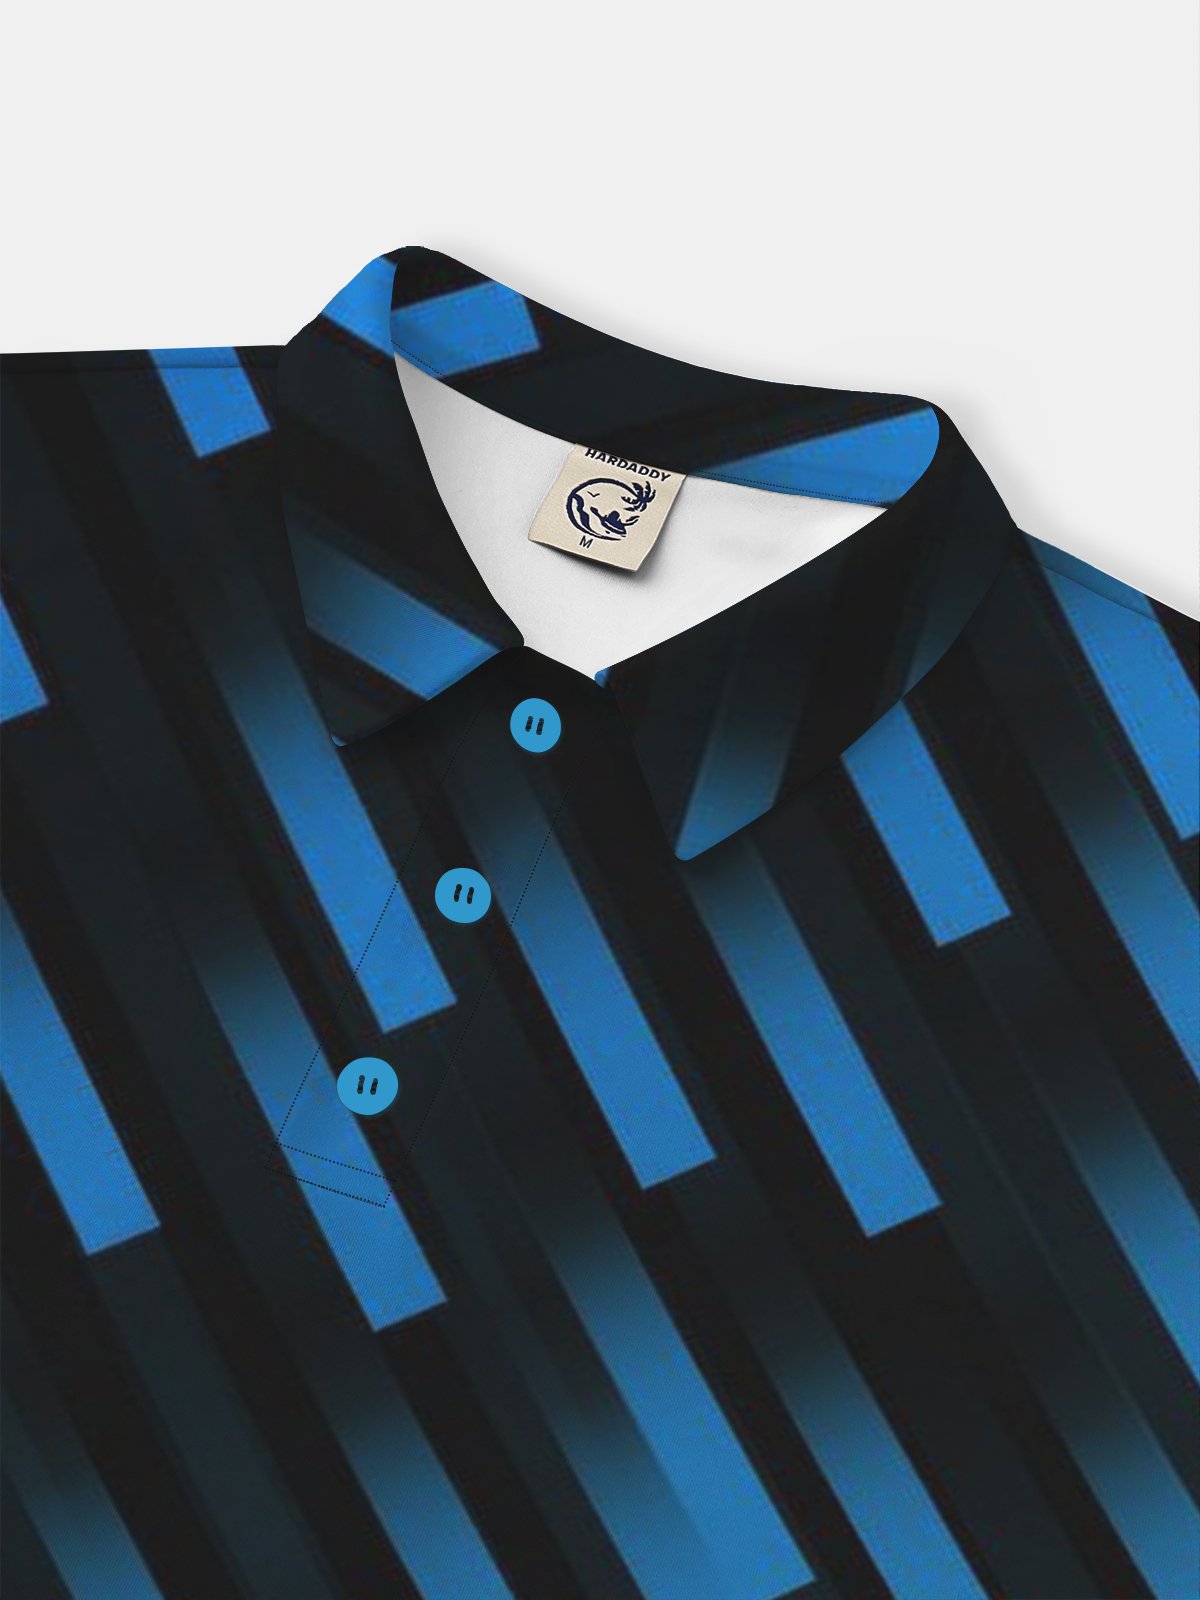 Hardaddy Moisture-wicking Golf Polo 3D Abstract Gradient Color Geometry